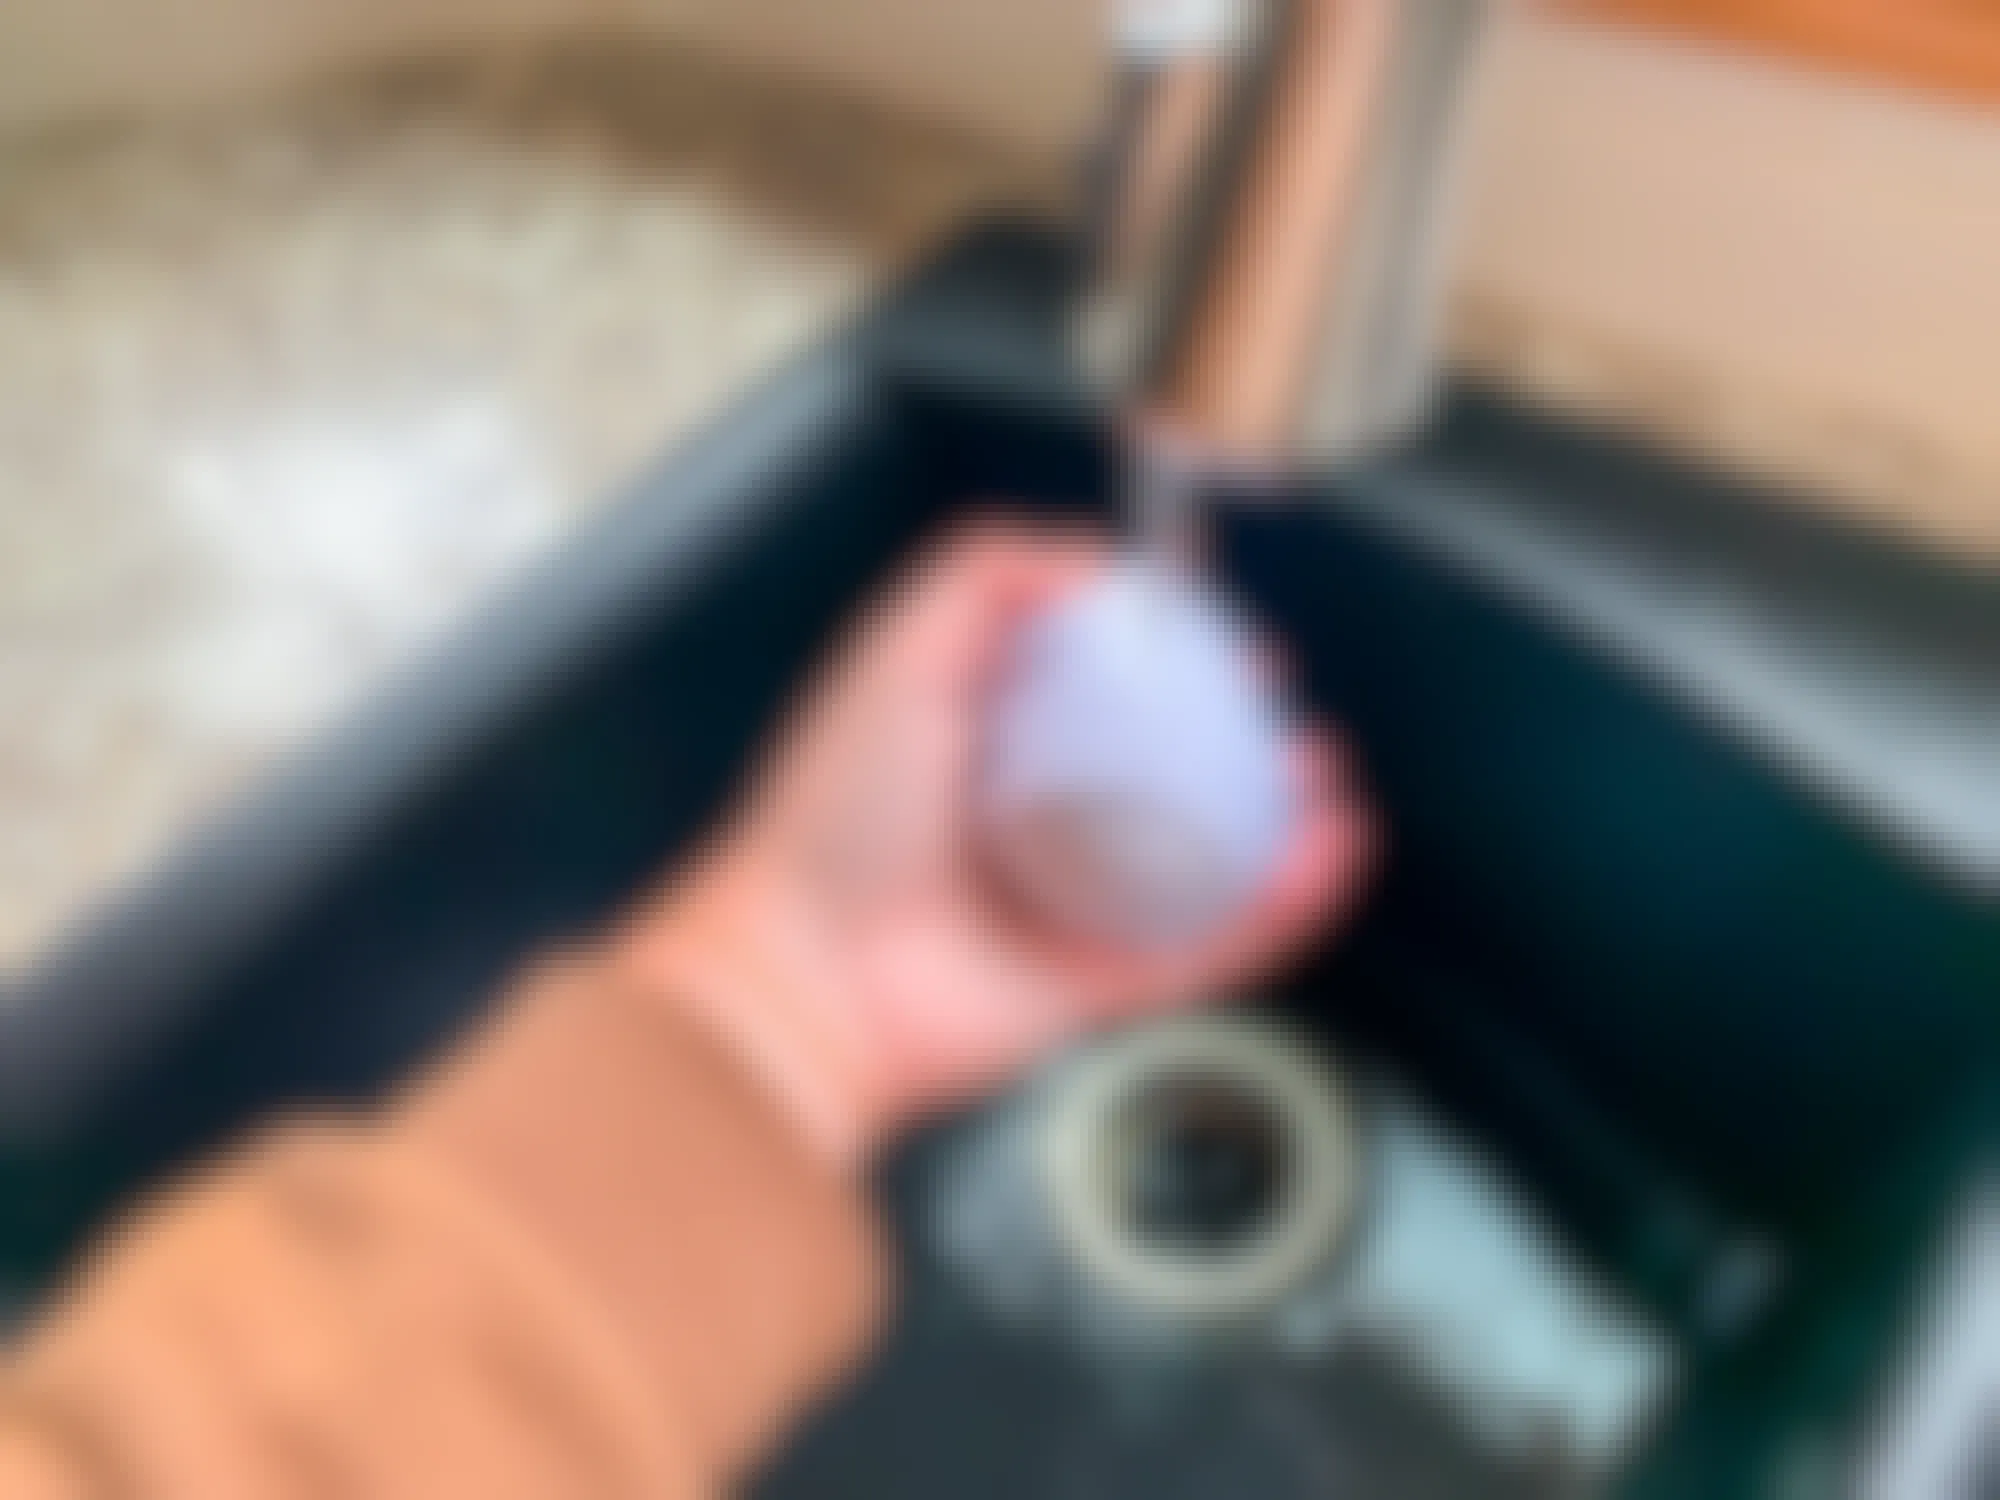 a person putting a sock ball under a water faucet